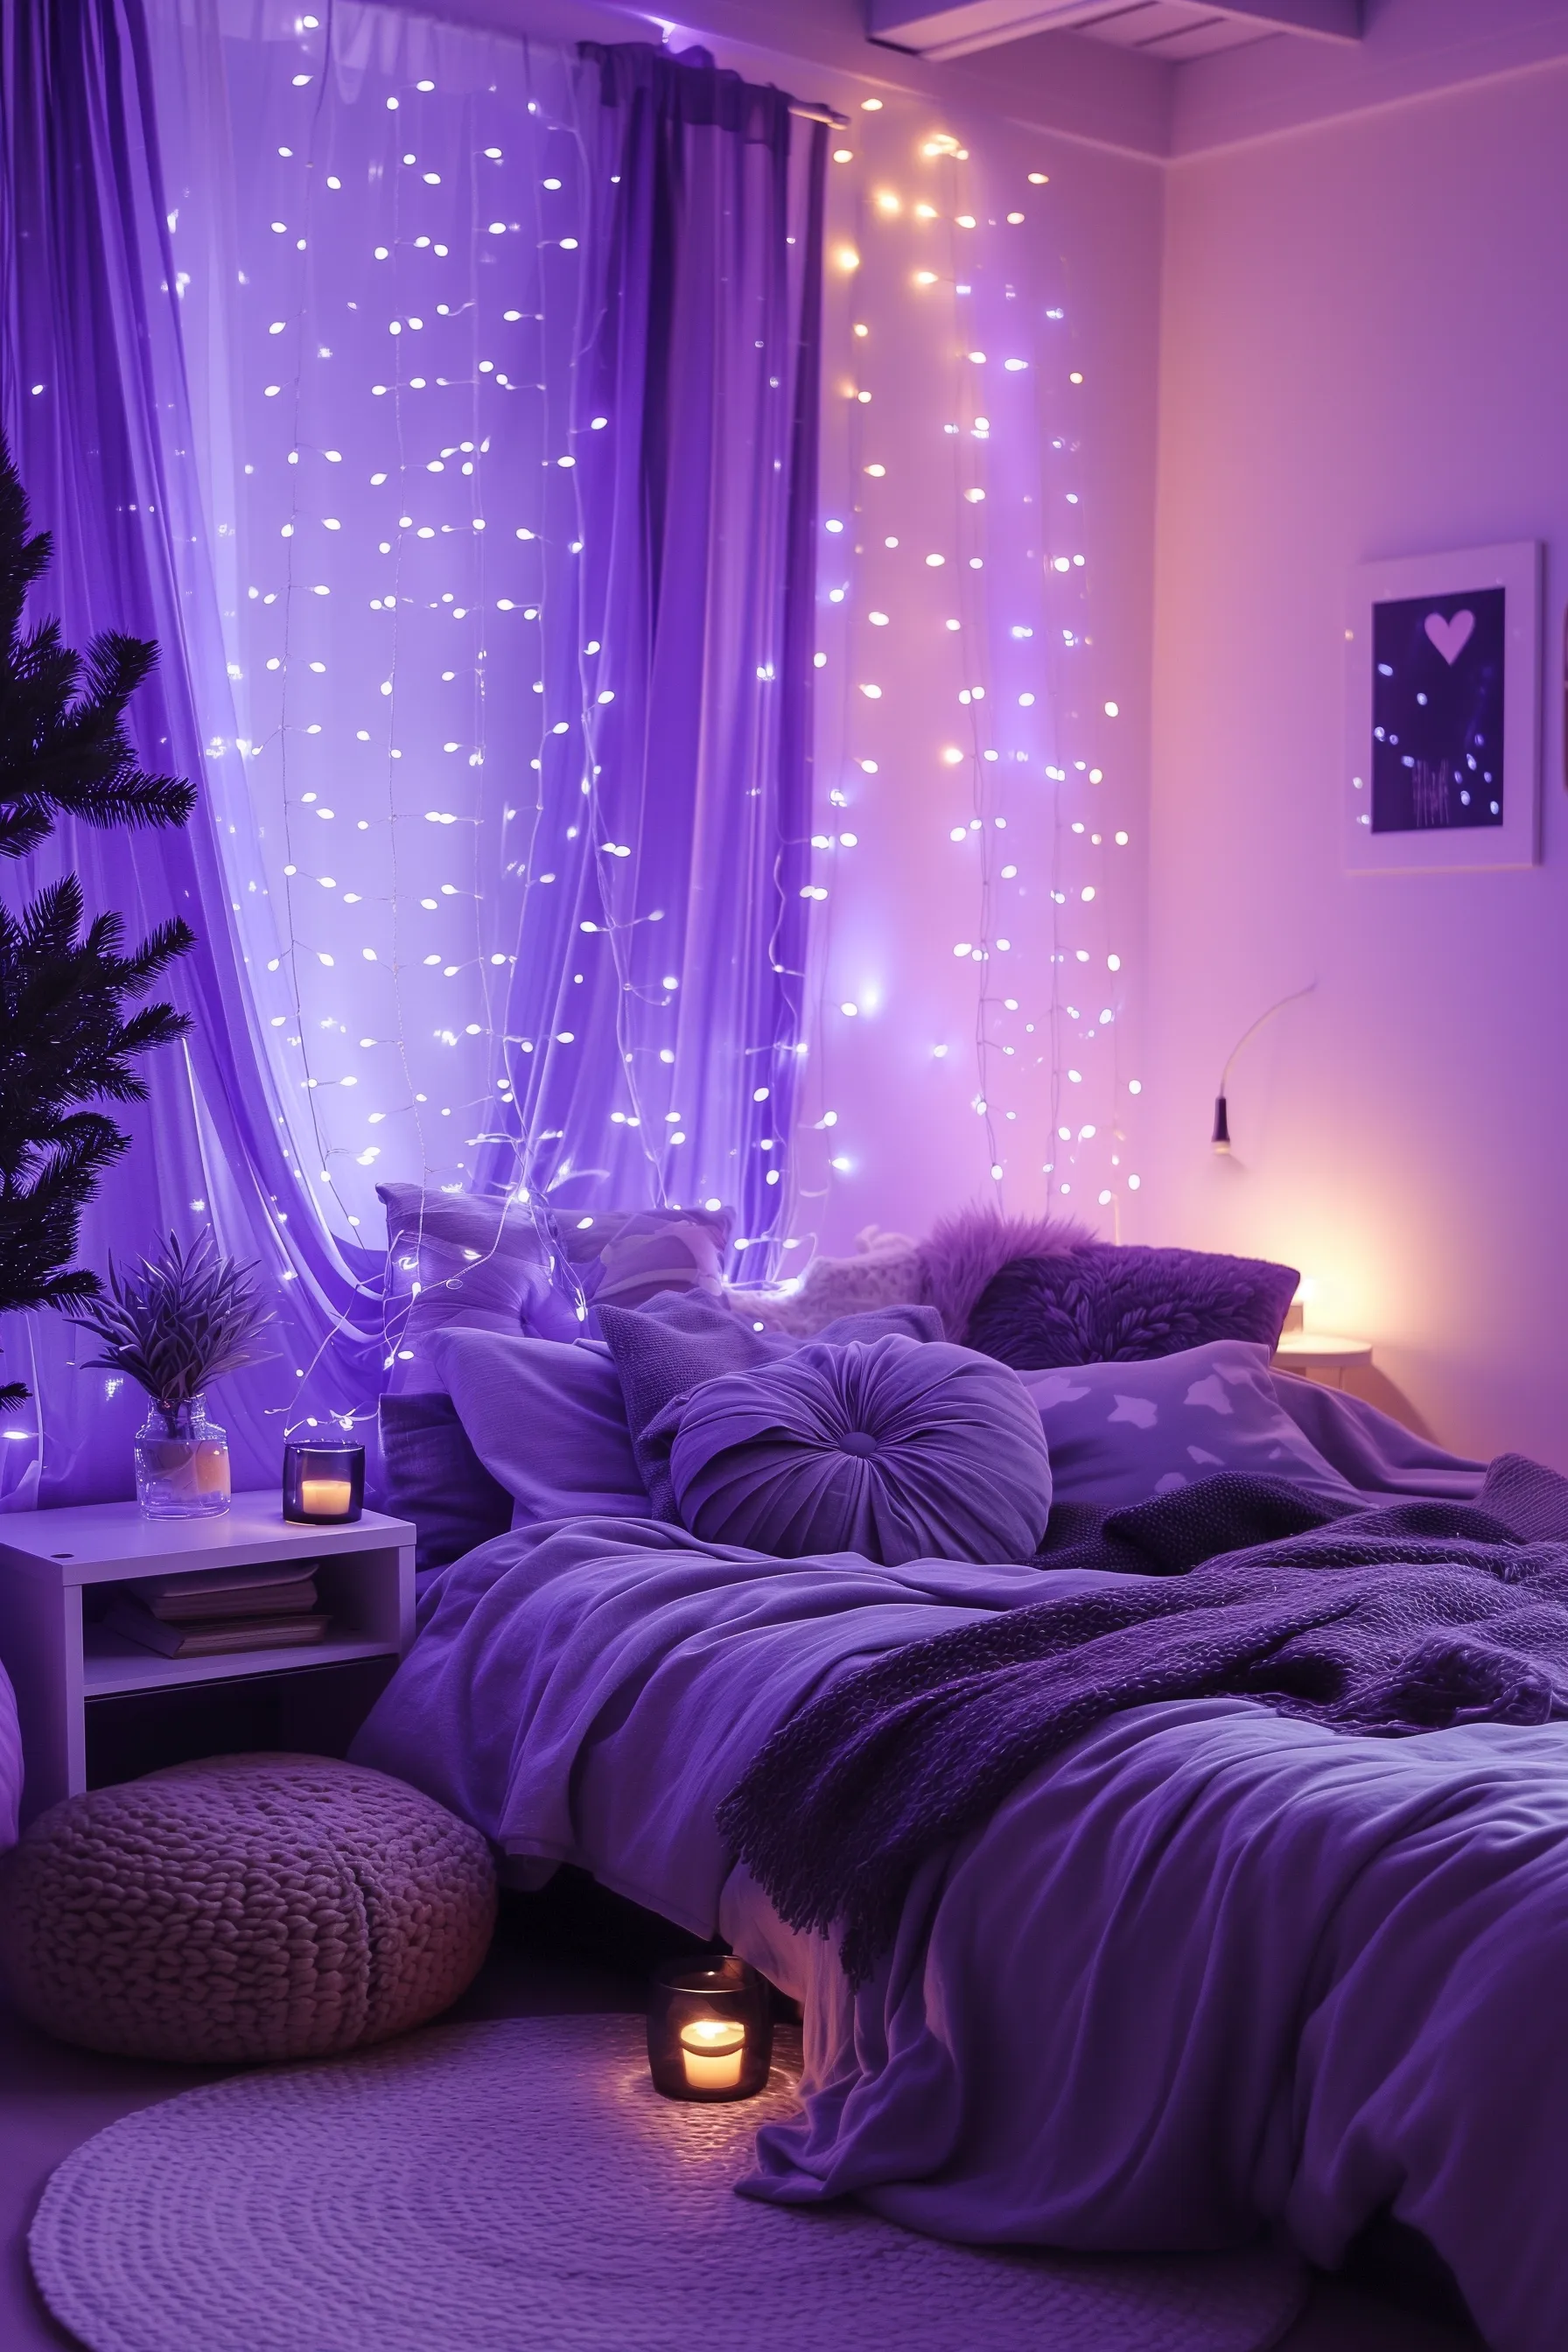 Purple bedroom with fairy lights, pillows, rugs and ottomans